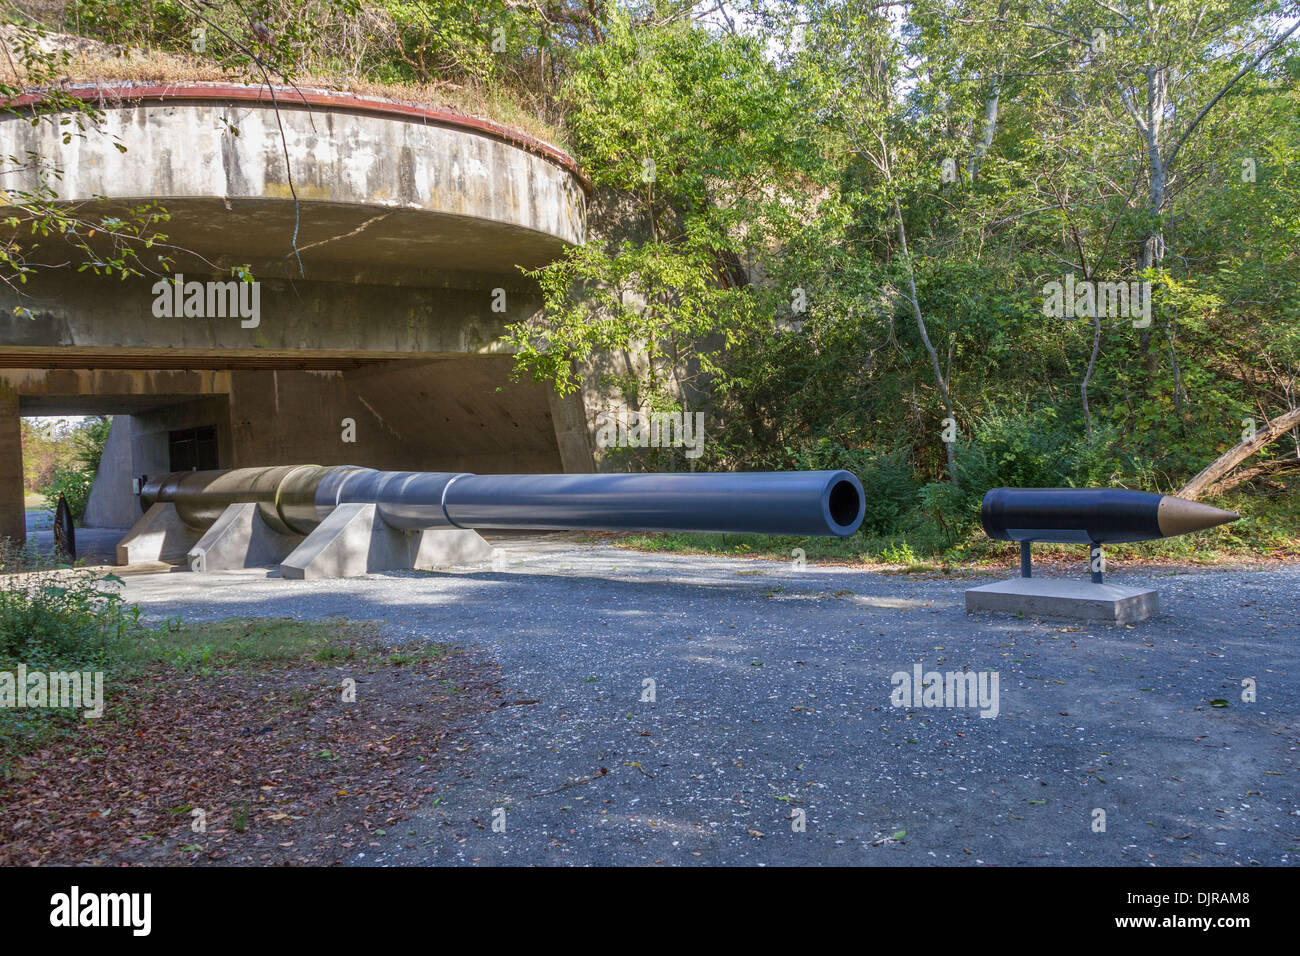 Winslow Battery 16 inch gun and ammunition preserved at Eastern Shore of Virginia National Wildlife Refuge. Stock Photo